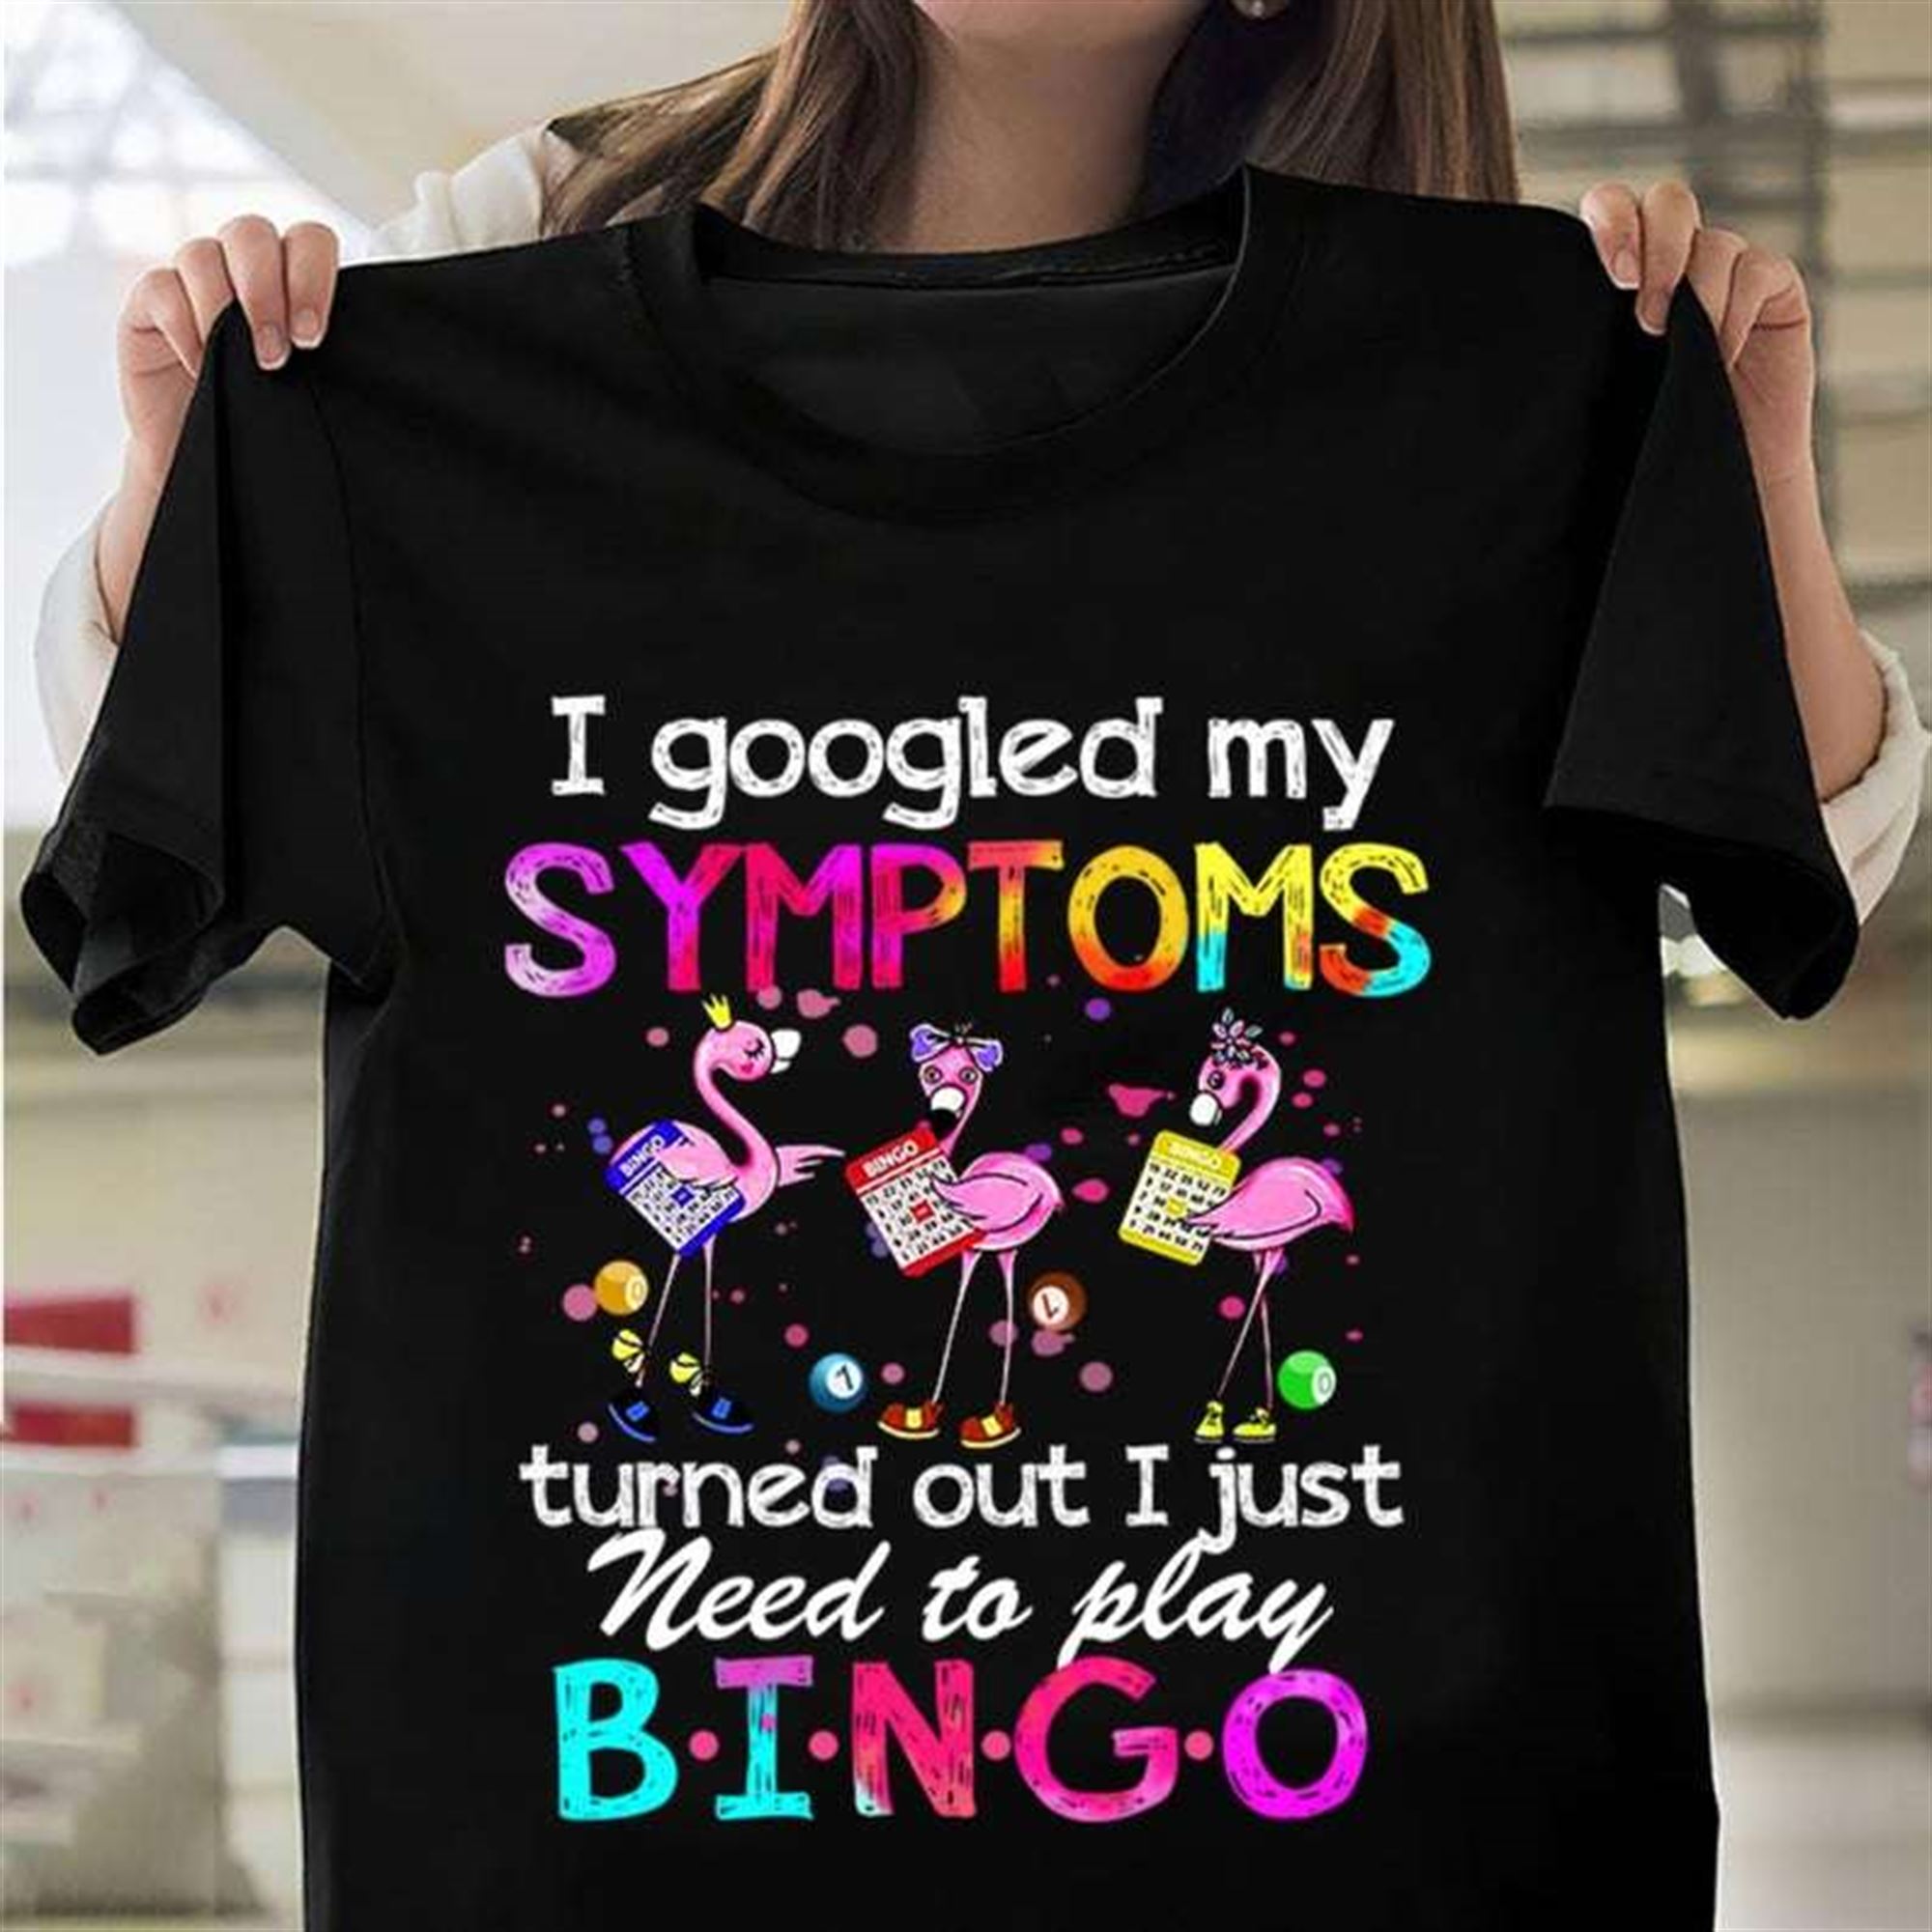 I Googled My Symptoms Turned Out I Just Need To Play Bingo T-shirt Plus Size Up To 5x